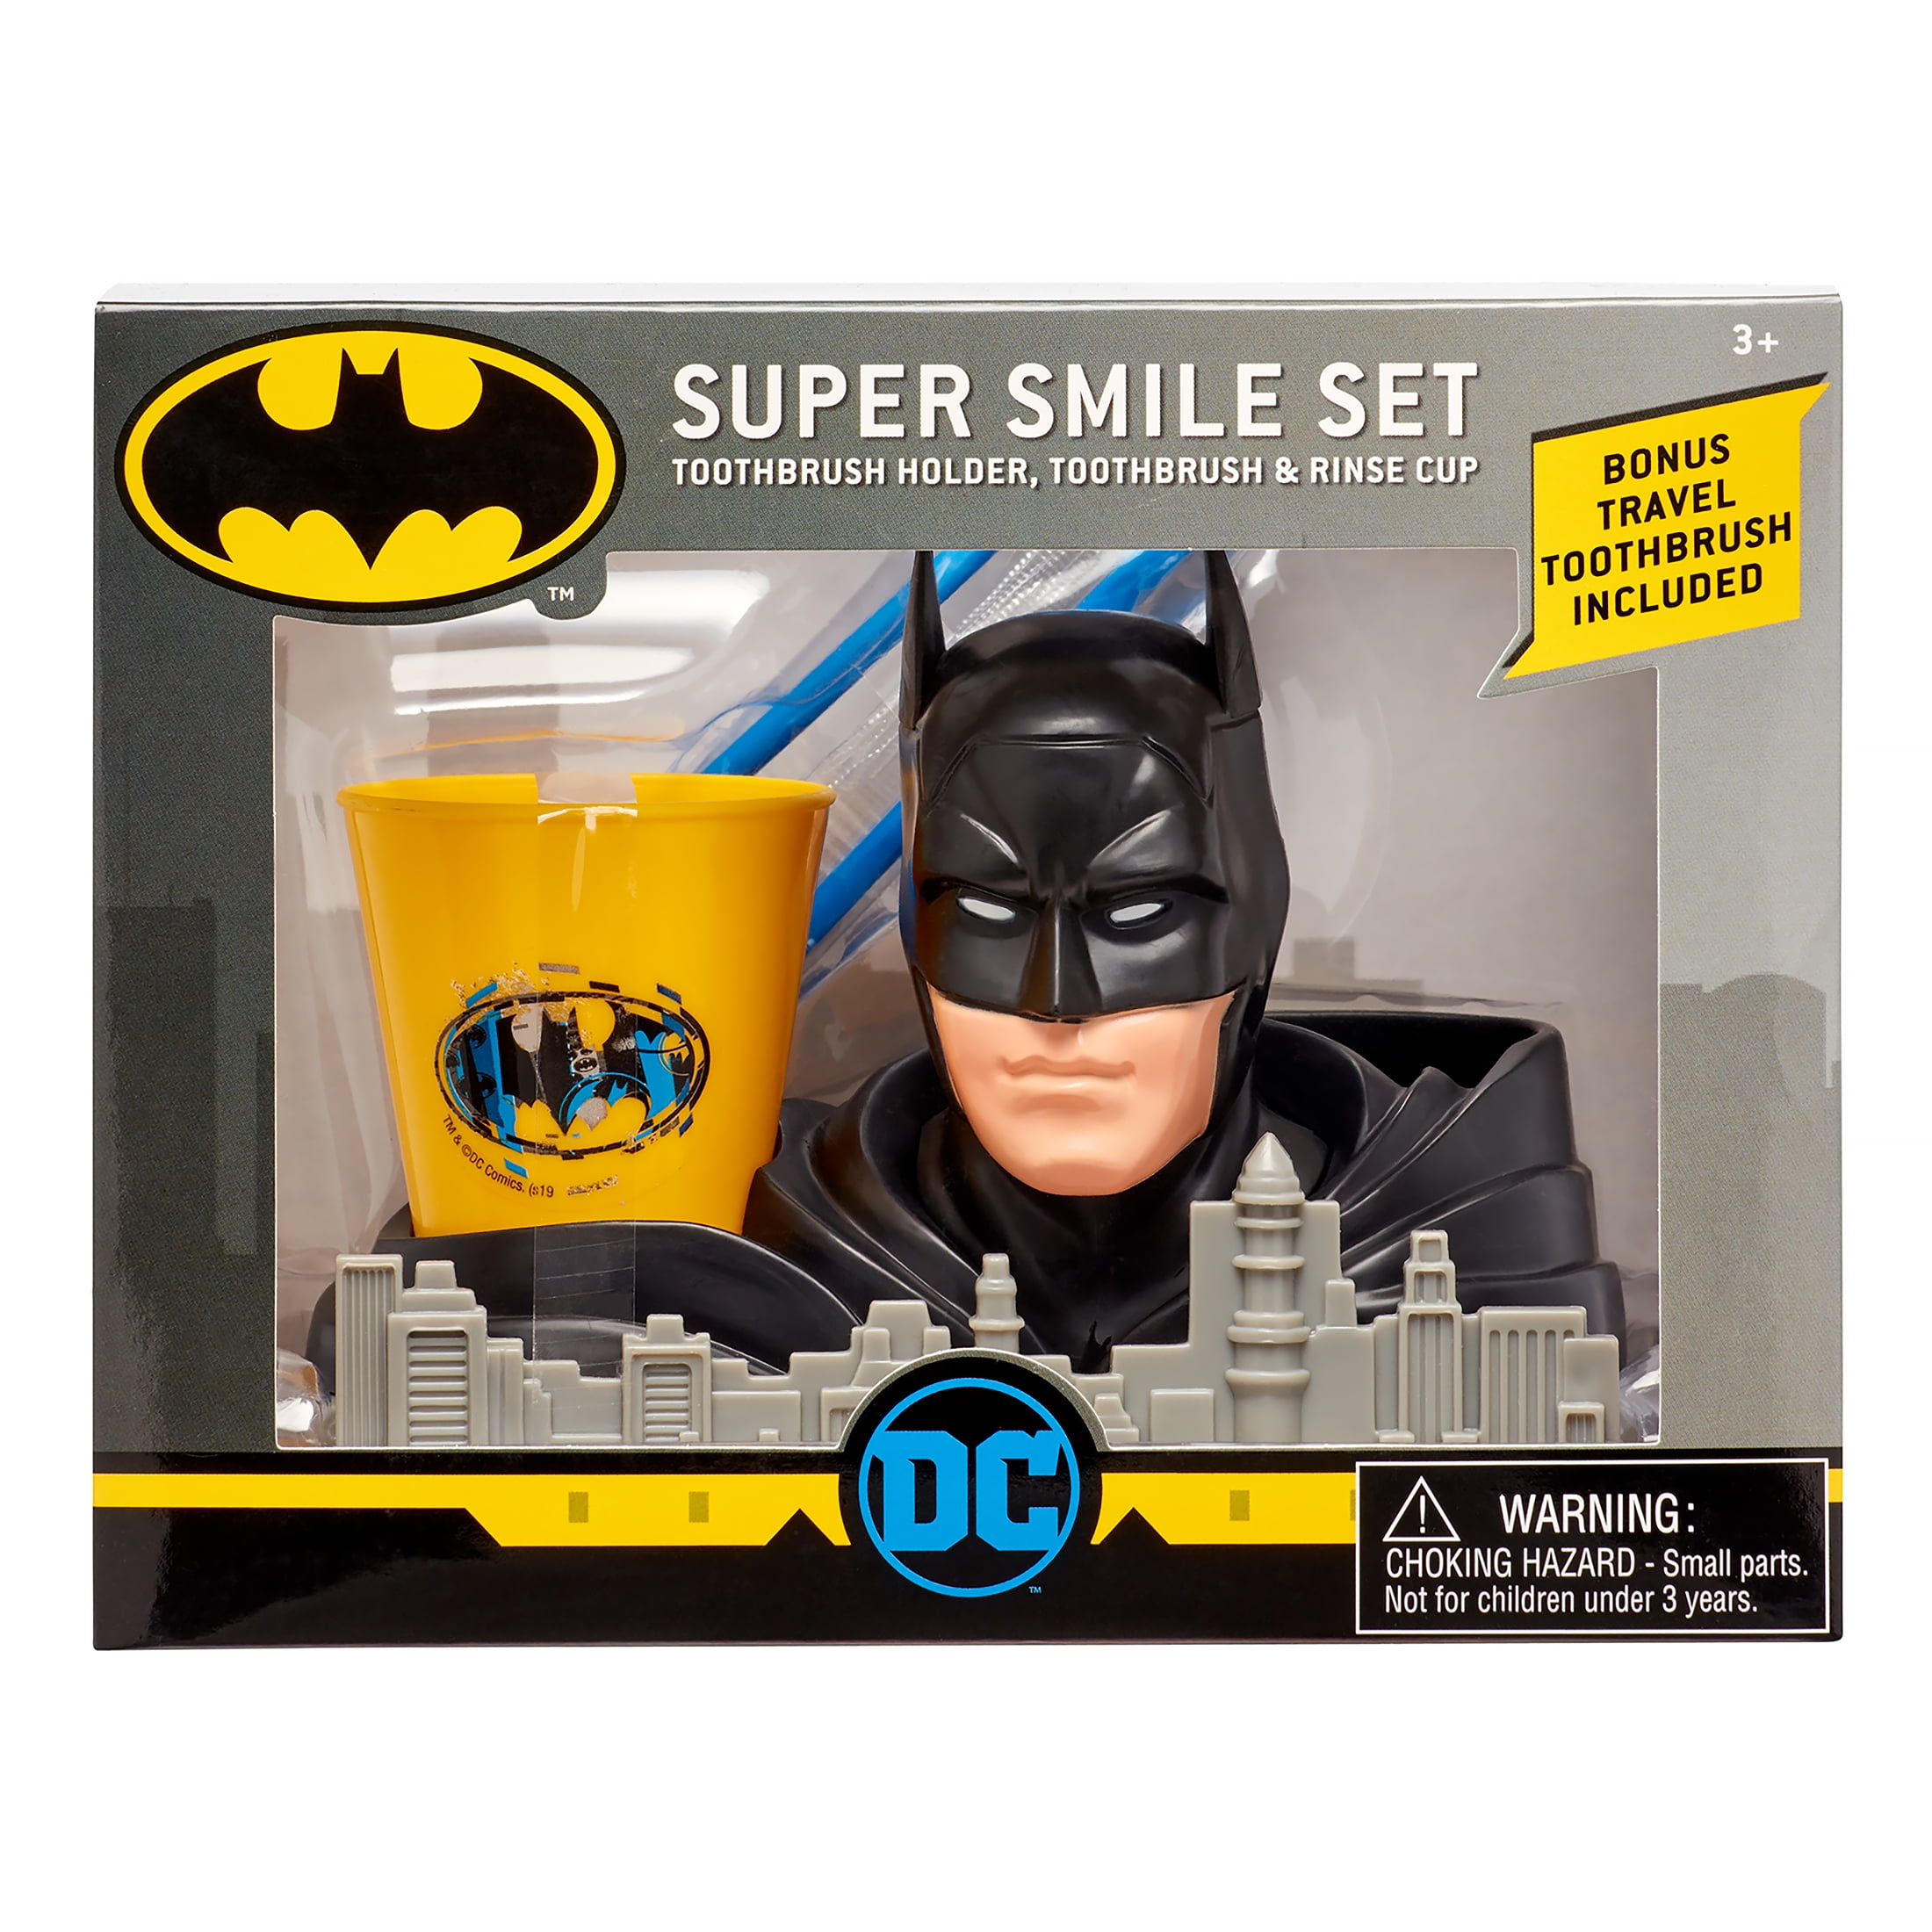 Brushing Timer Toothpaste Includes Toothbrush Dc Comics Batman 6pc Super Hero Smile Gift Set Toothbrush Holder & Rinse Cup! 